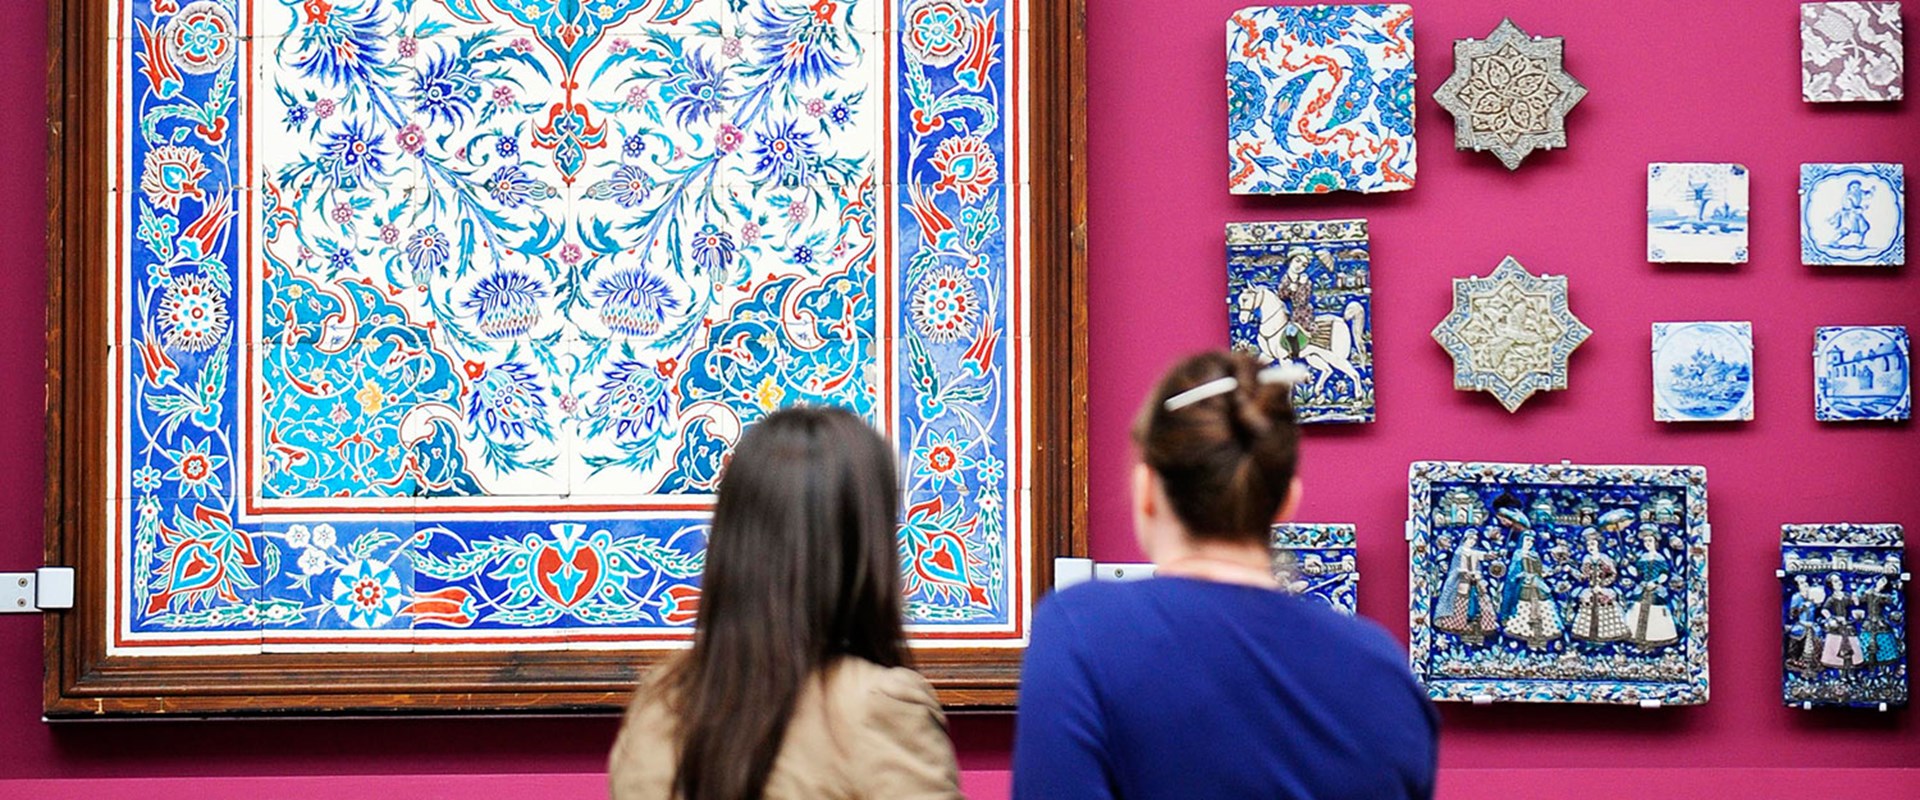 Two visitors looking at mosaic tiles hanging on a wall.